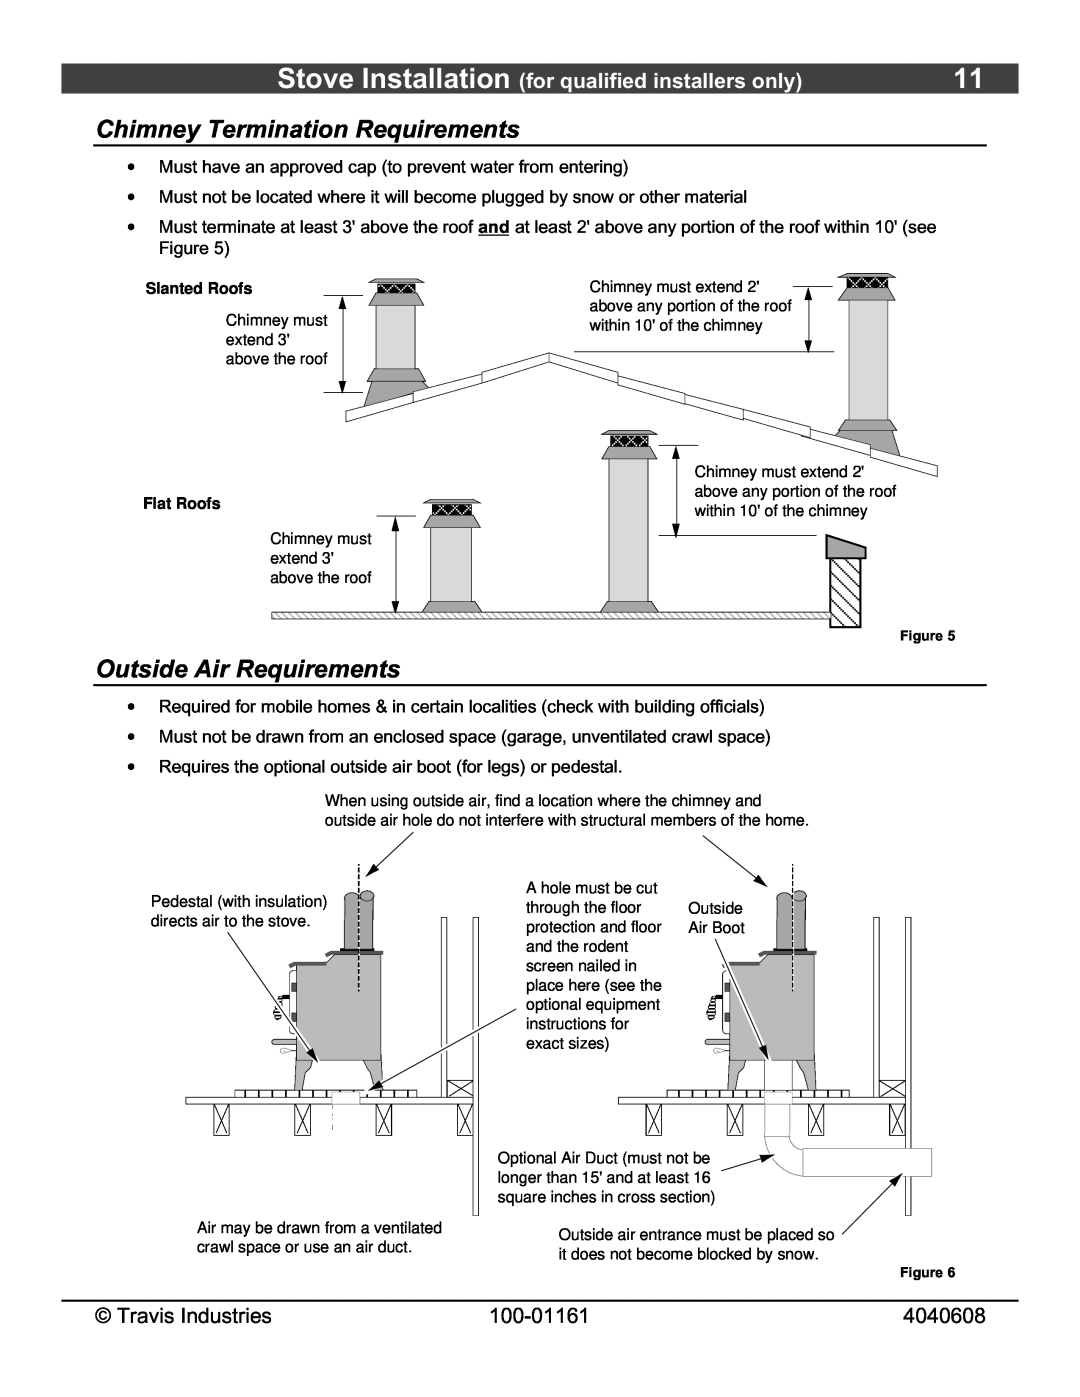 Lopi Endeavor Chimney Termination Requirements, Outside Air Requirements, Stove Installation for qualified installers only 